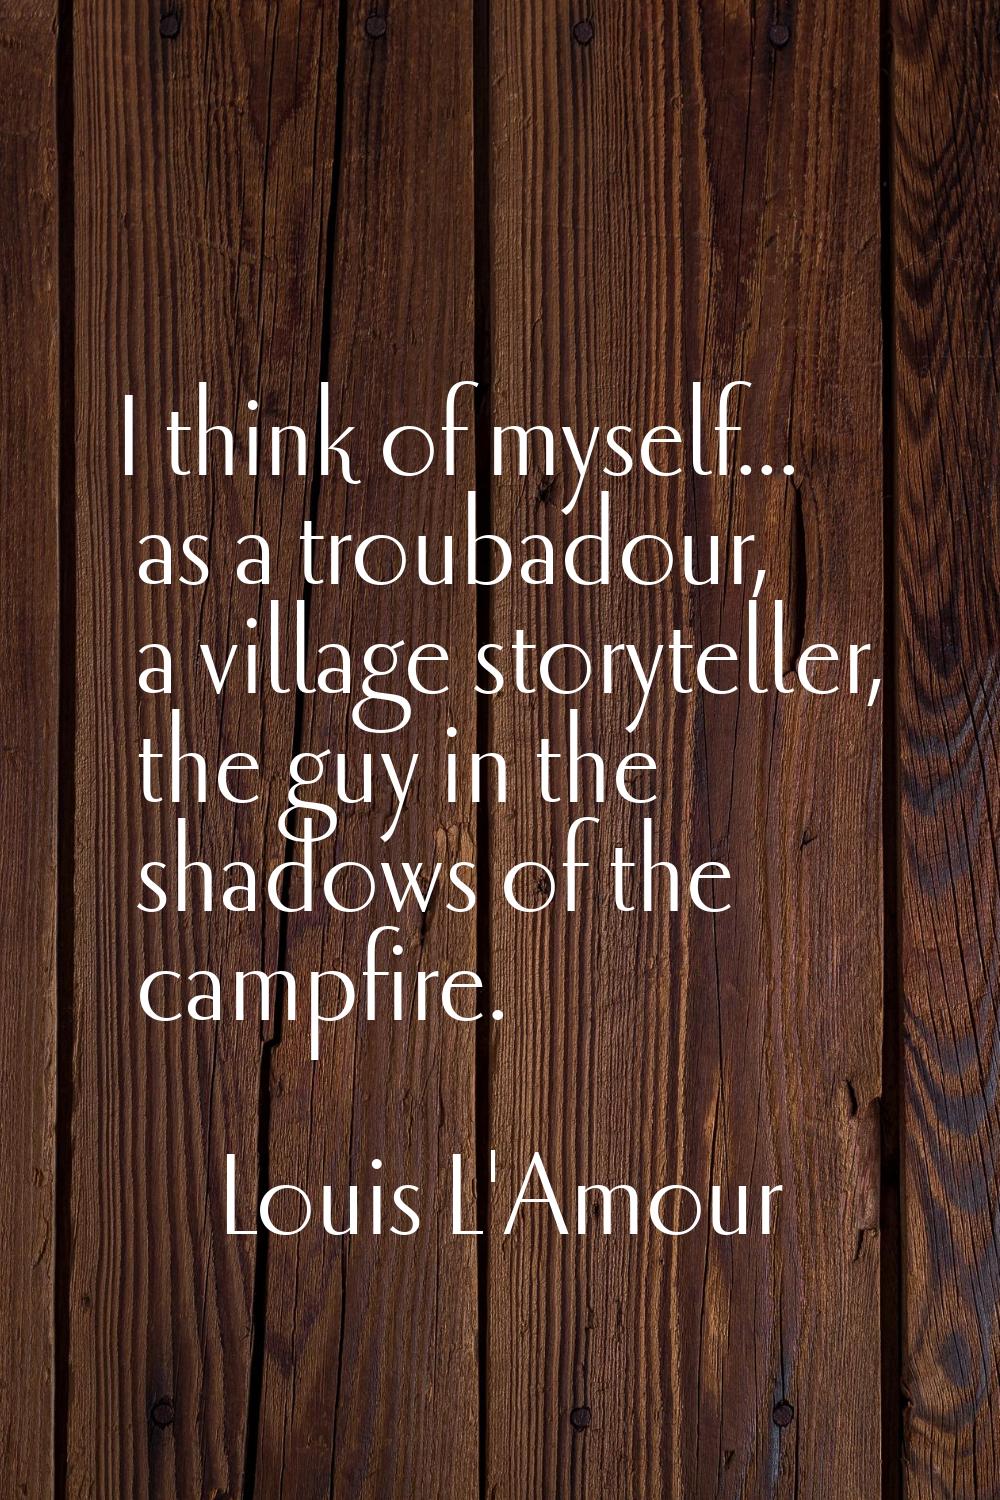 I think of myself... as a troubadour, a village storyteller, the guy in the shadows of the campfire